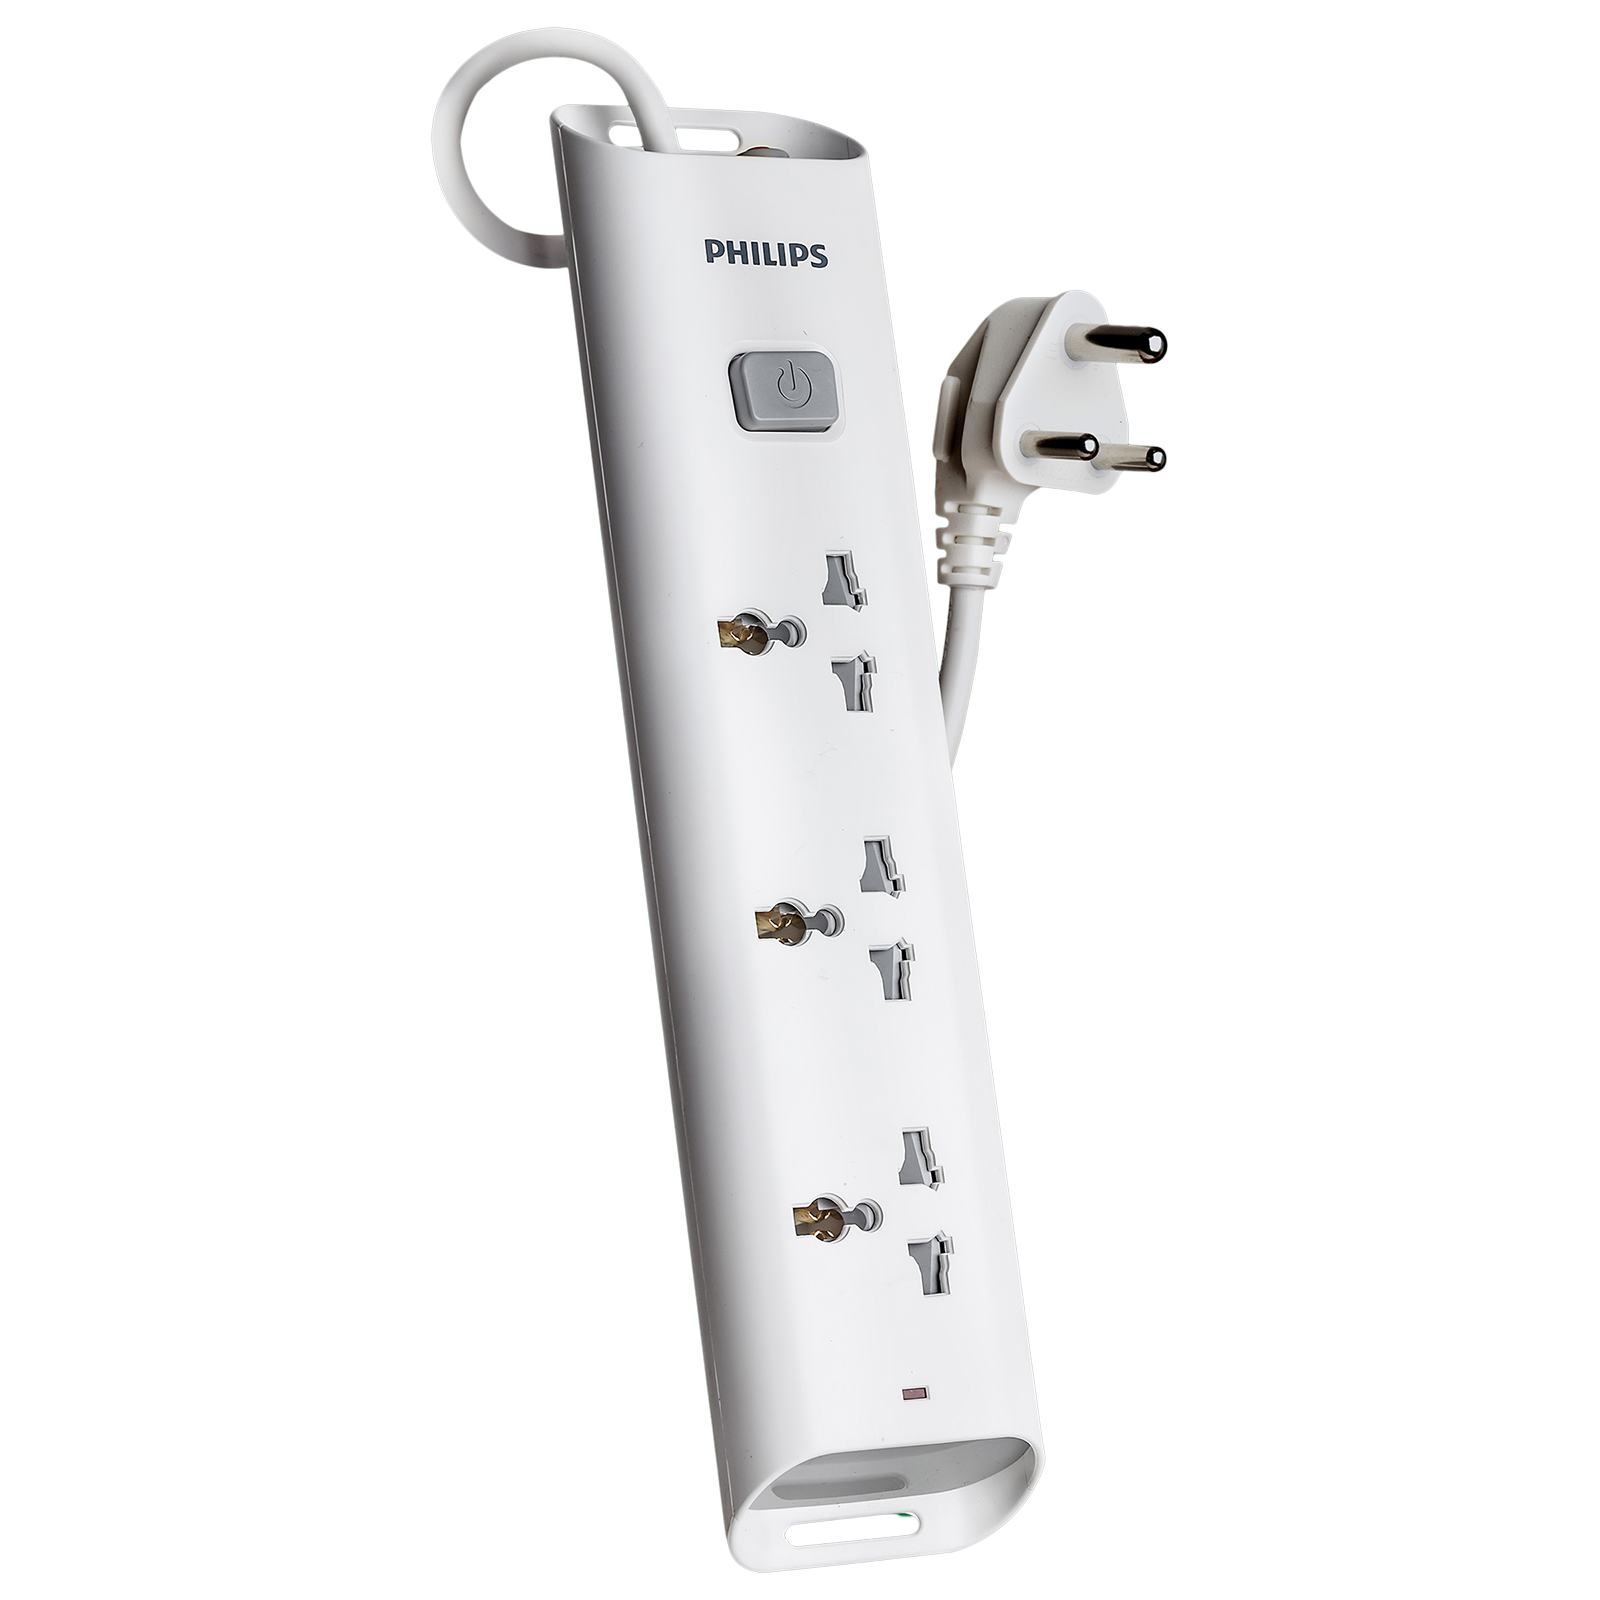 PHILIPS 10 Amps 3 Sockets Power Multiplier (1.2 Meters, Child Safety Shutter, CHP2432W/94, White)